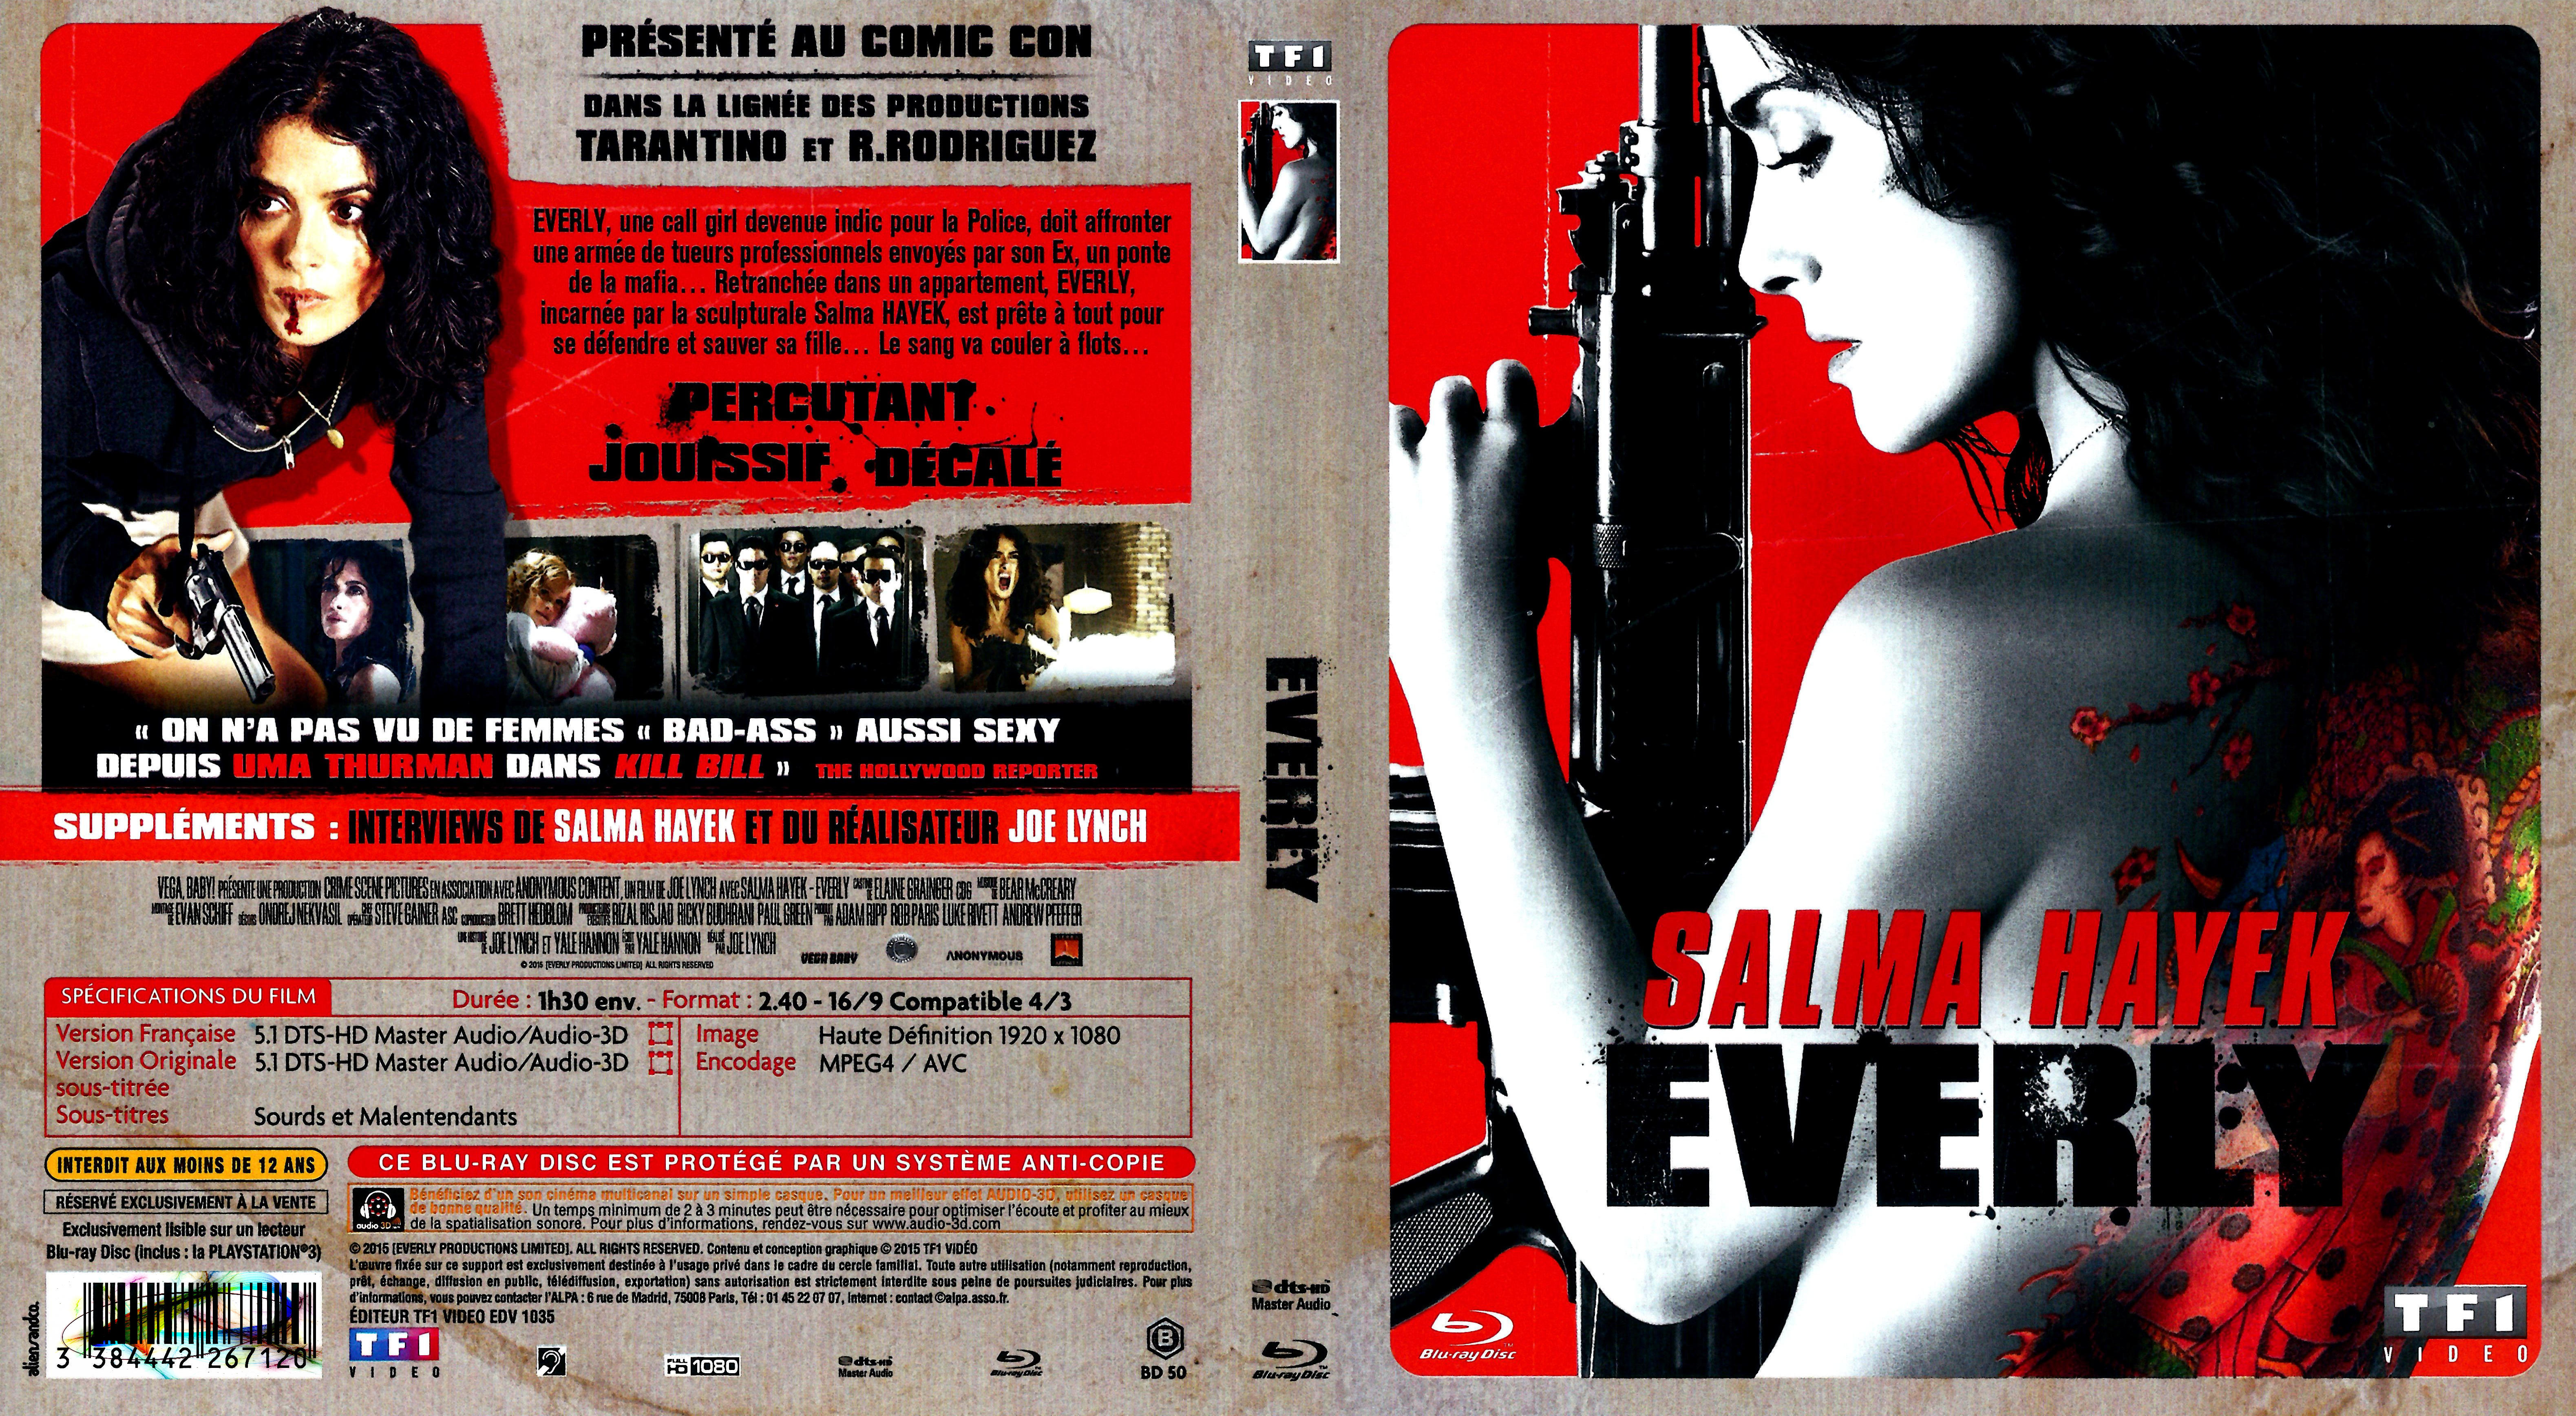 Jaquette DVD Everly (BLU-RAY)